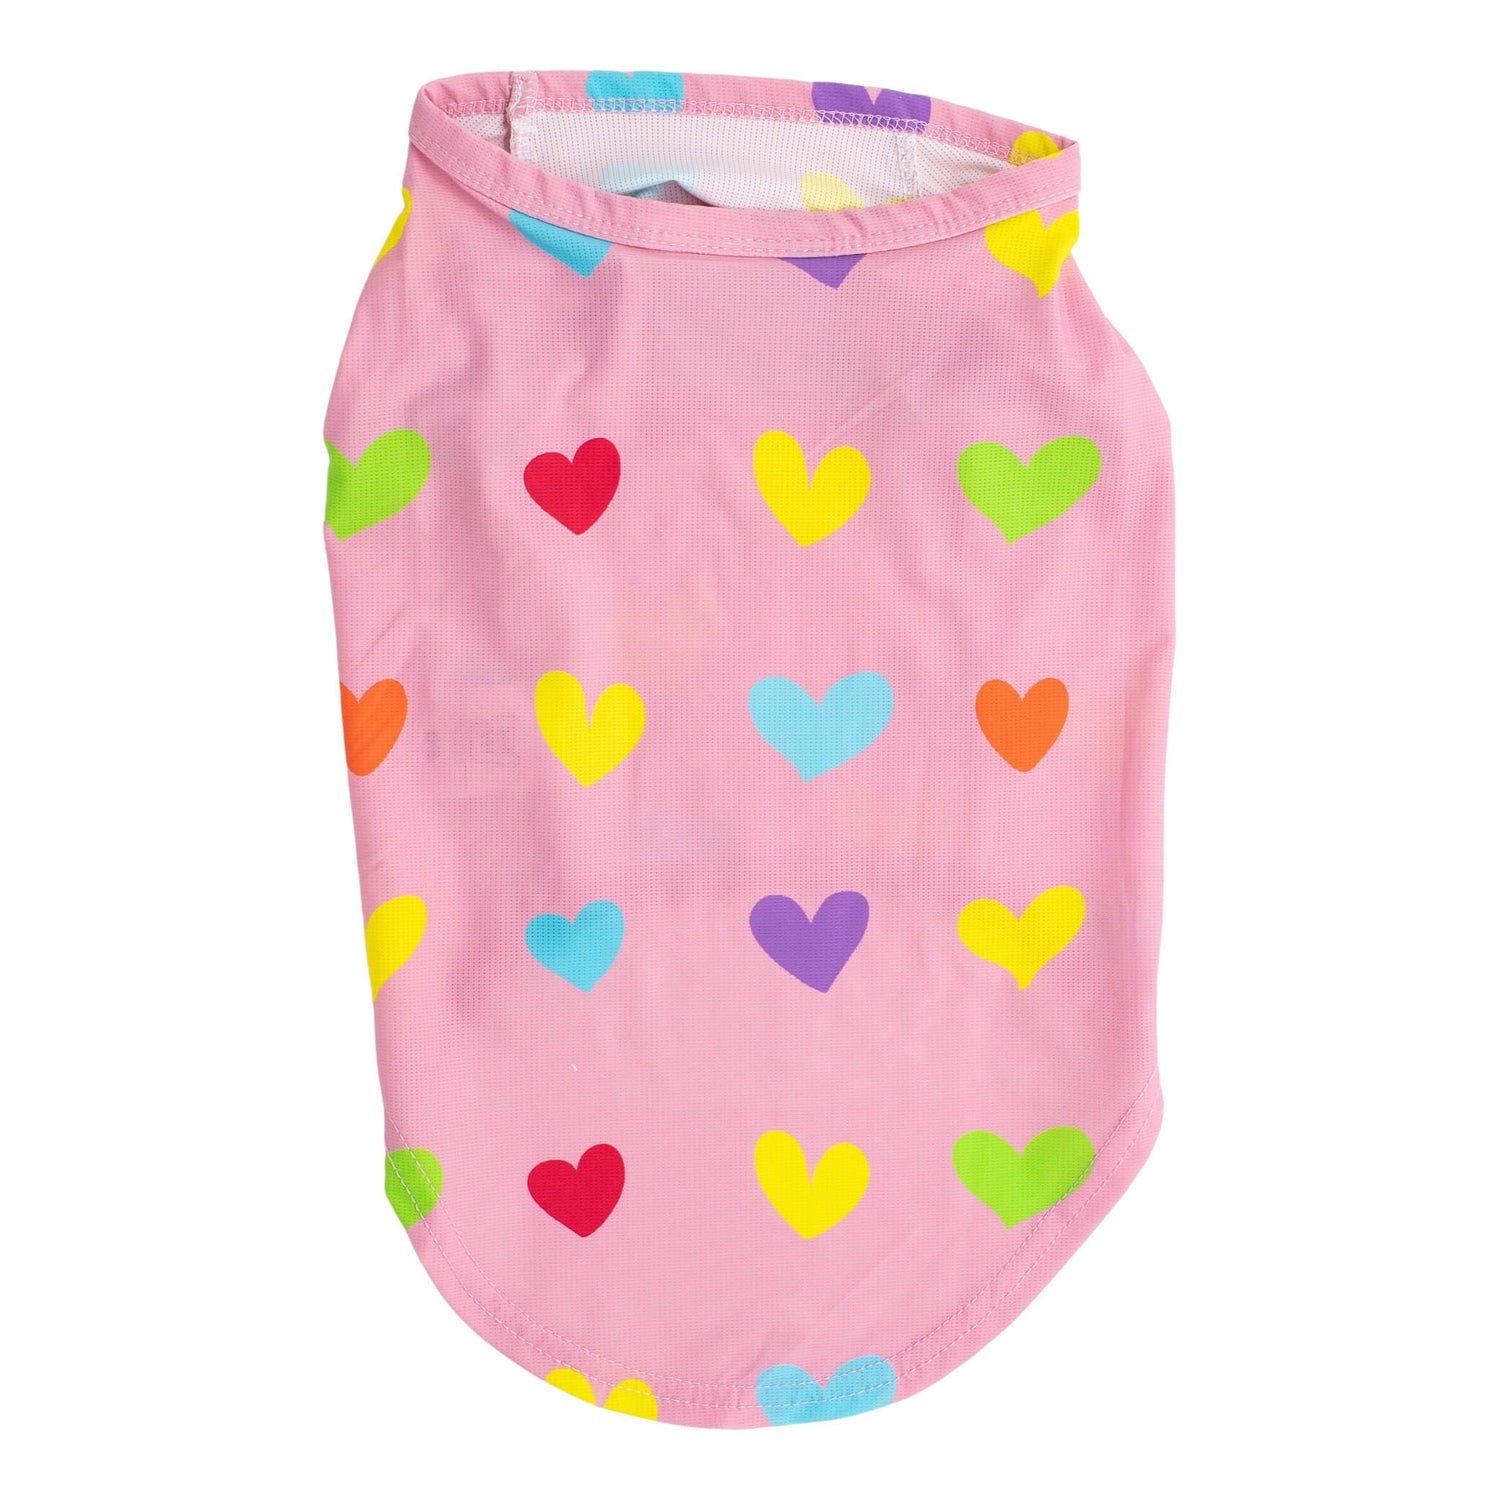 A back flat lay of a pink shirt with orange, blue, yellow, and green love hearts printed on it.  This shirt for dogs is designed to be wet to cool dogs down.